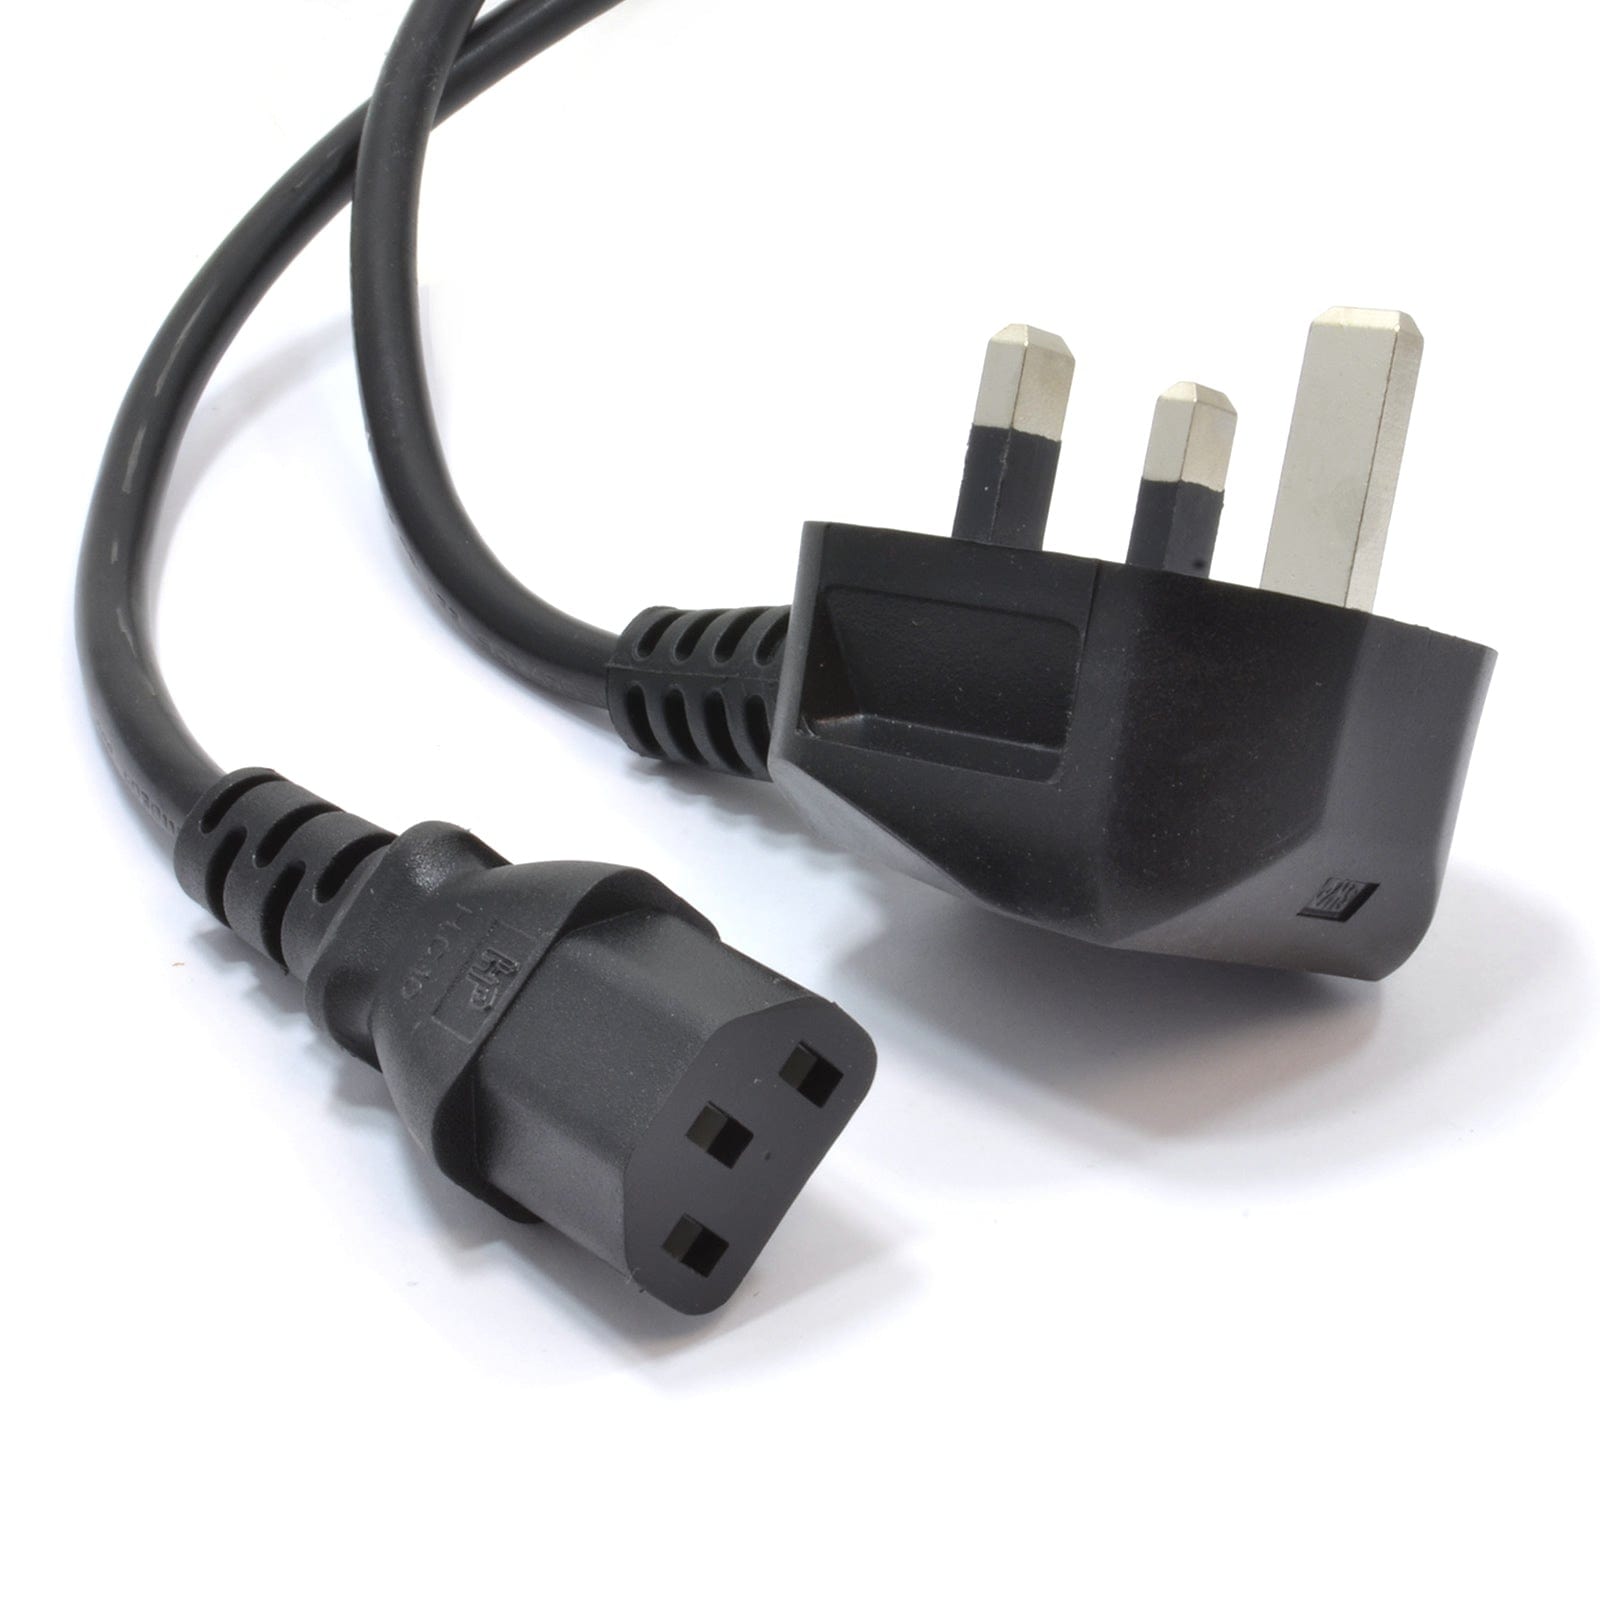 "Kettle" Type Power Cable 2m - IEC C13 (UK) - The Pi Hut